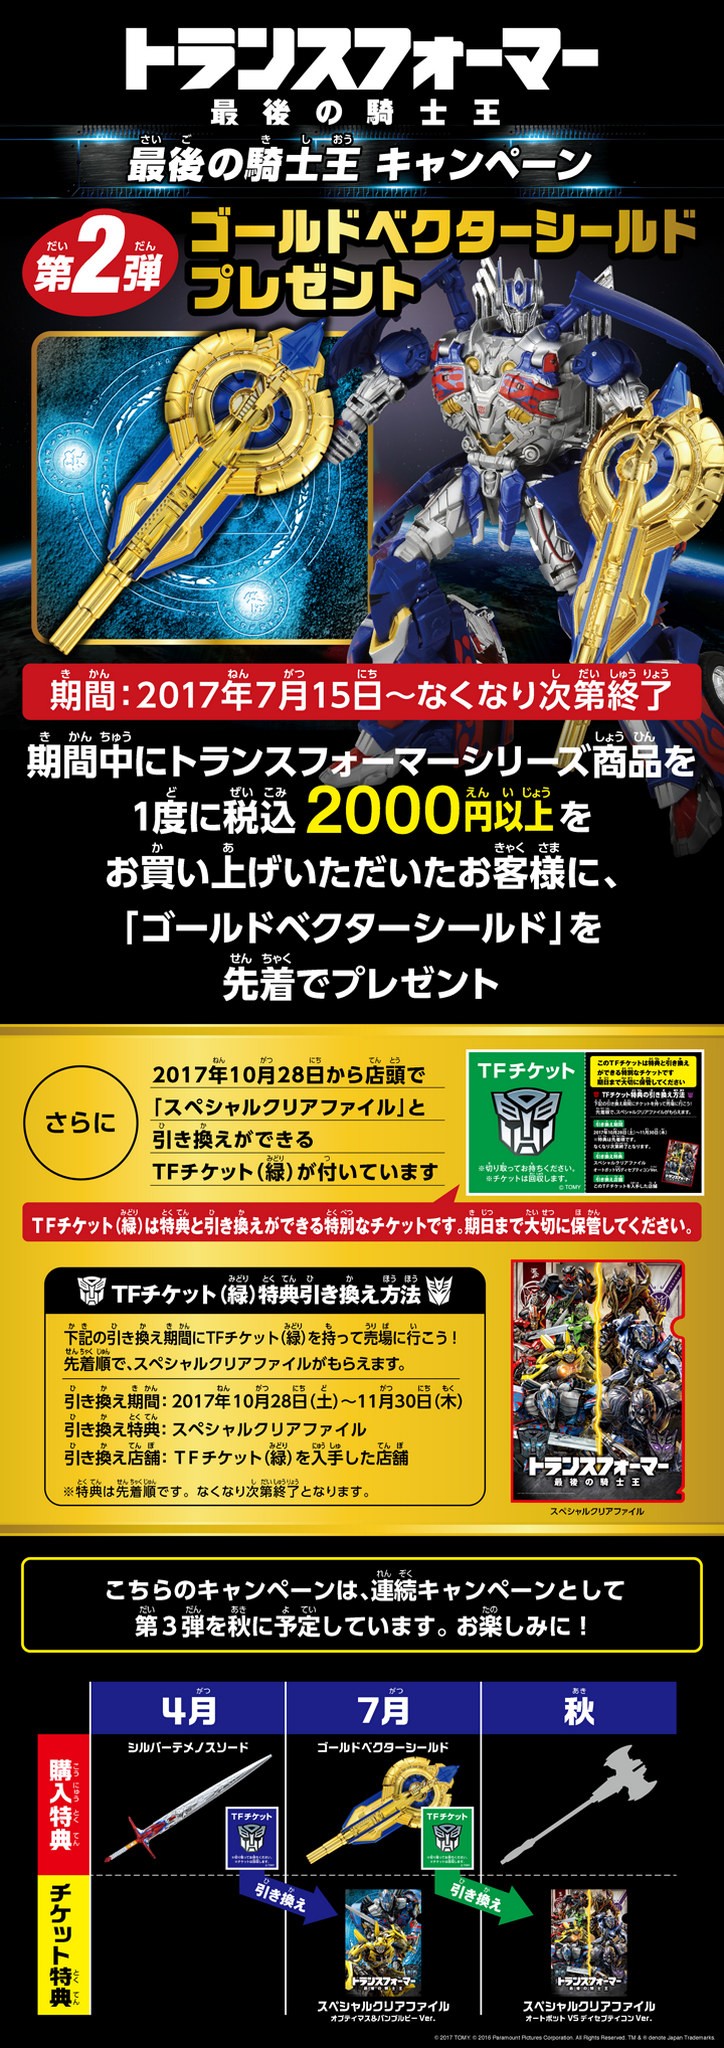 Transformers News: Takara Tomy Transformers The Last Knight Golden Shield Exclusive